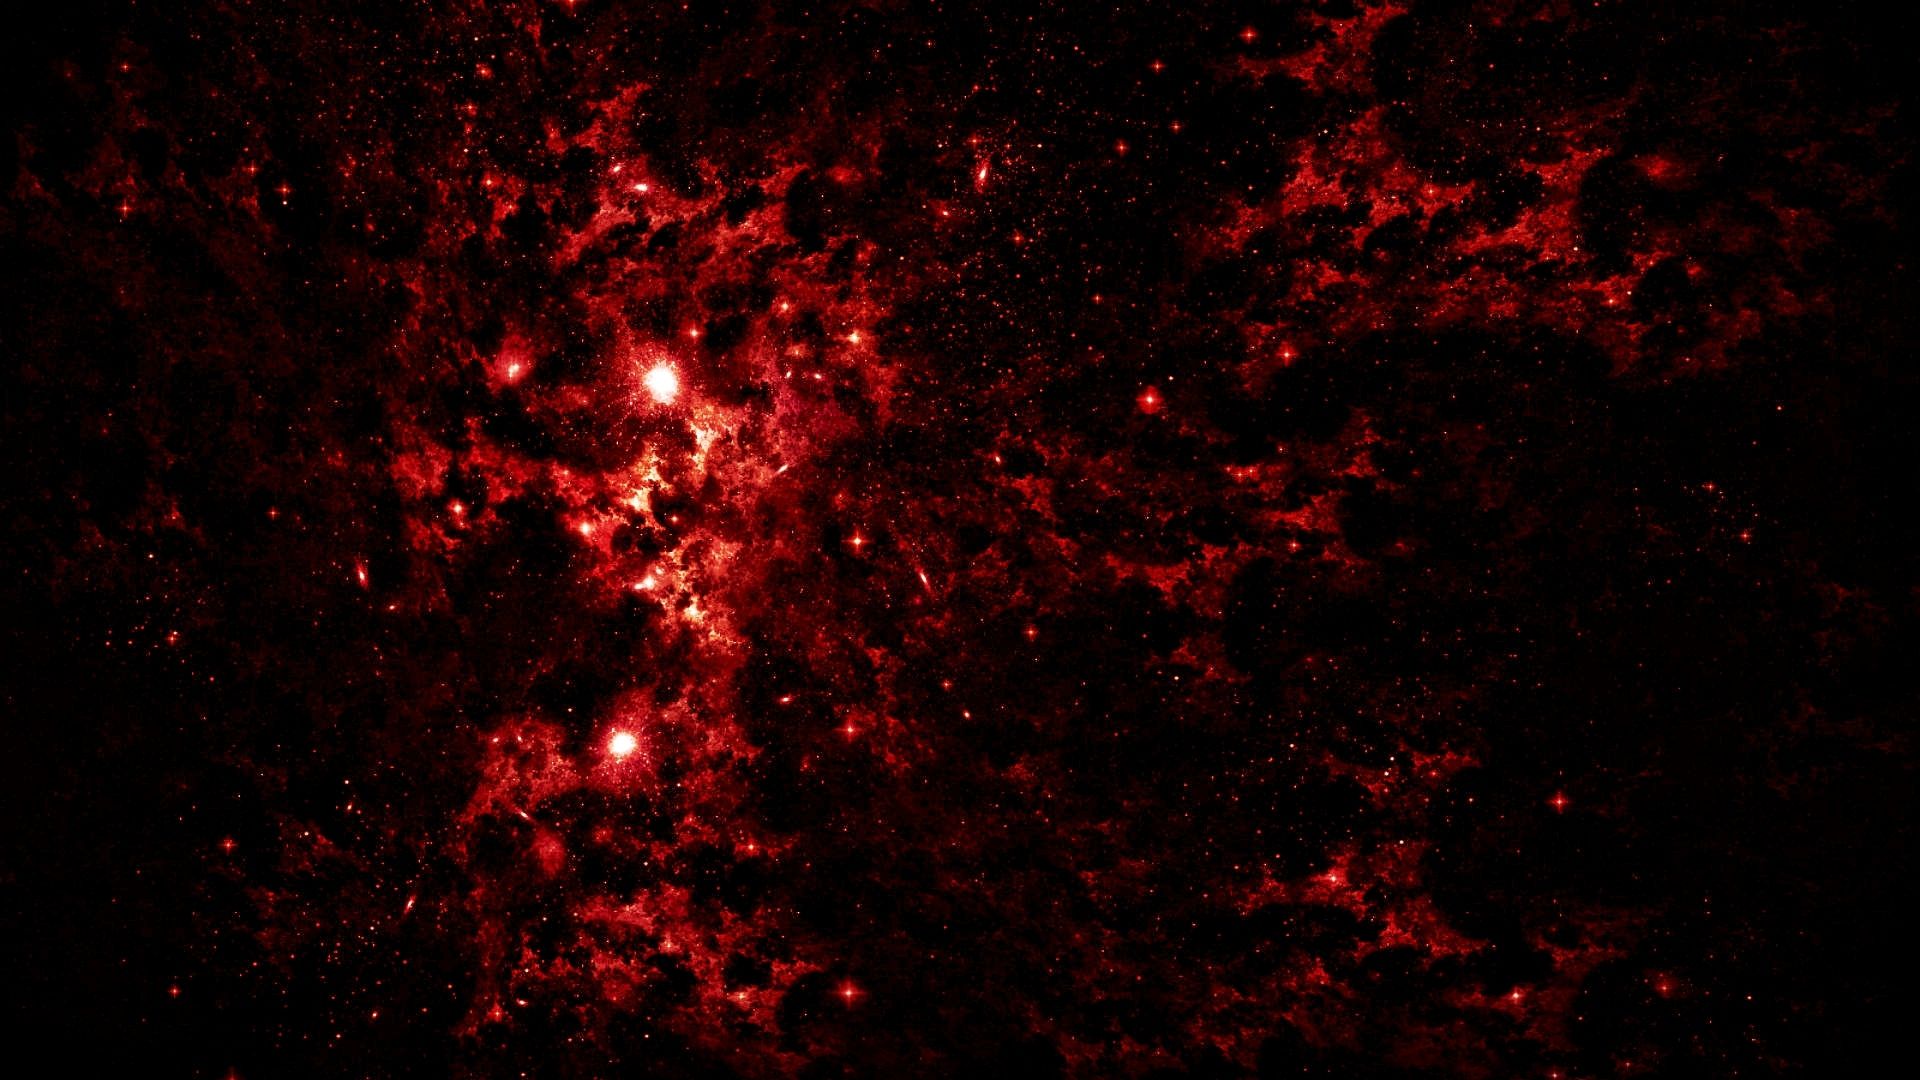 Cluster of red stars wallpaper and image, picture, photo